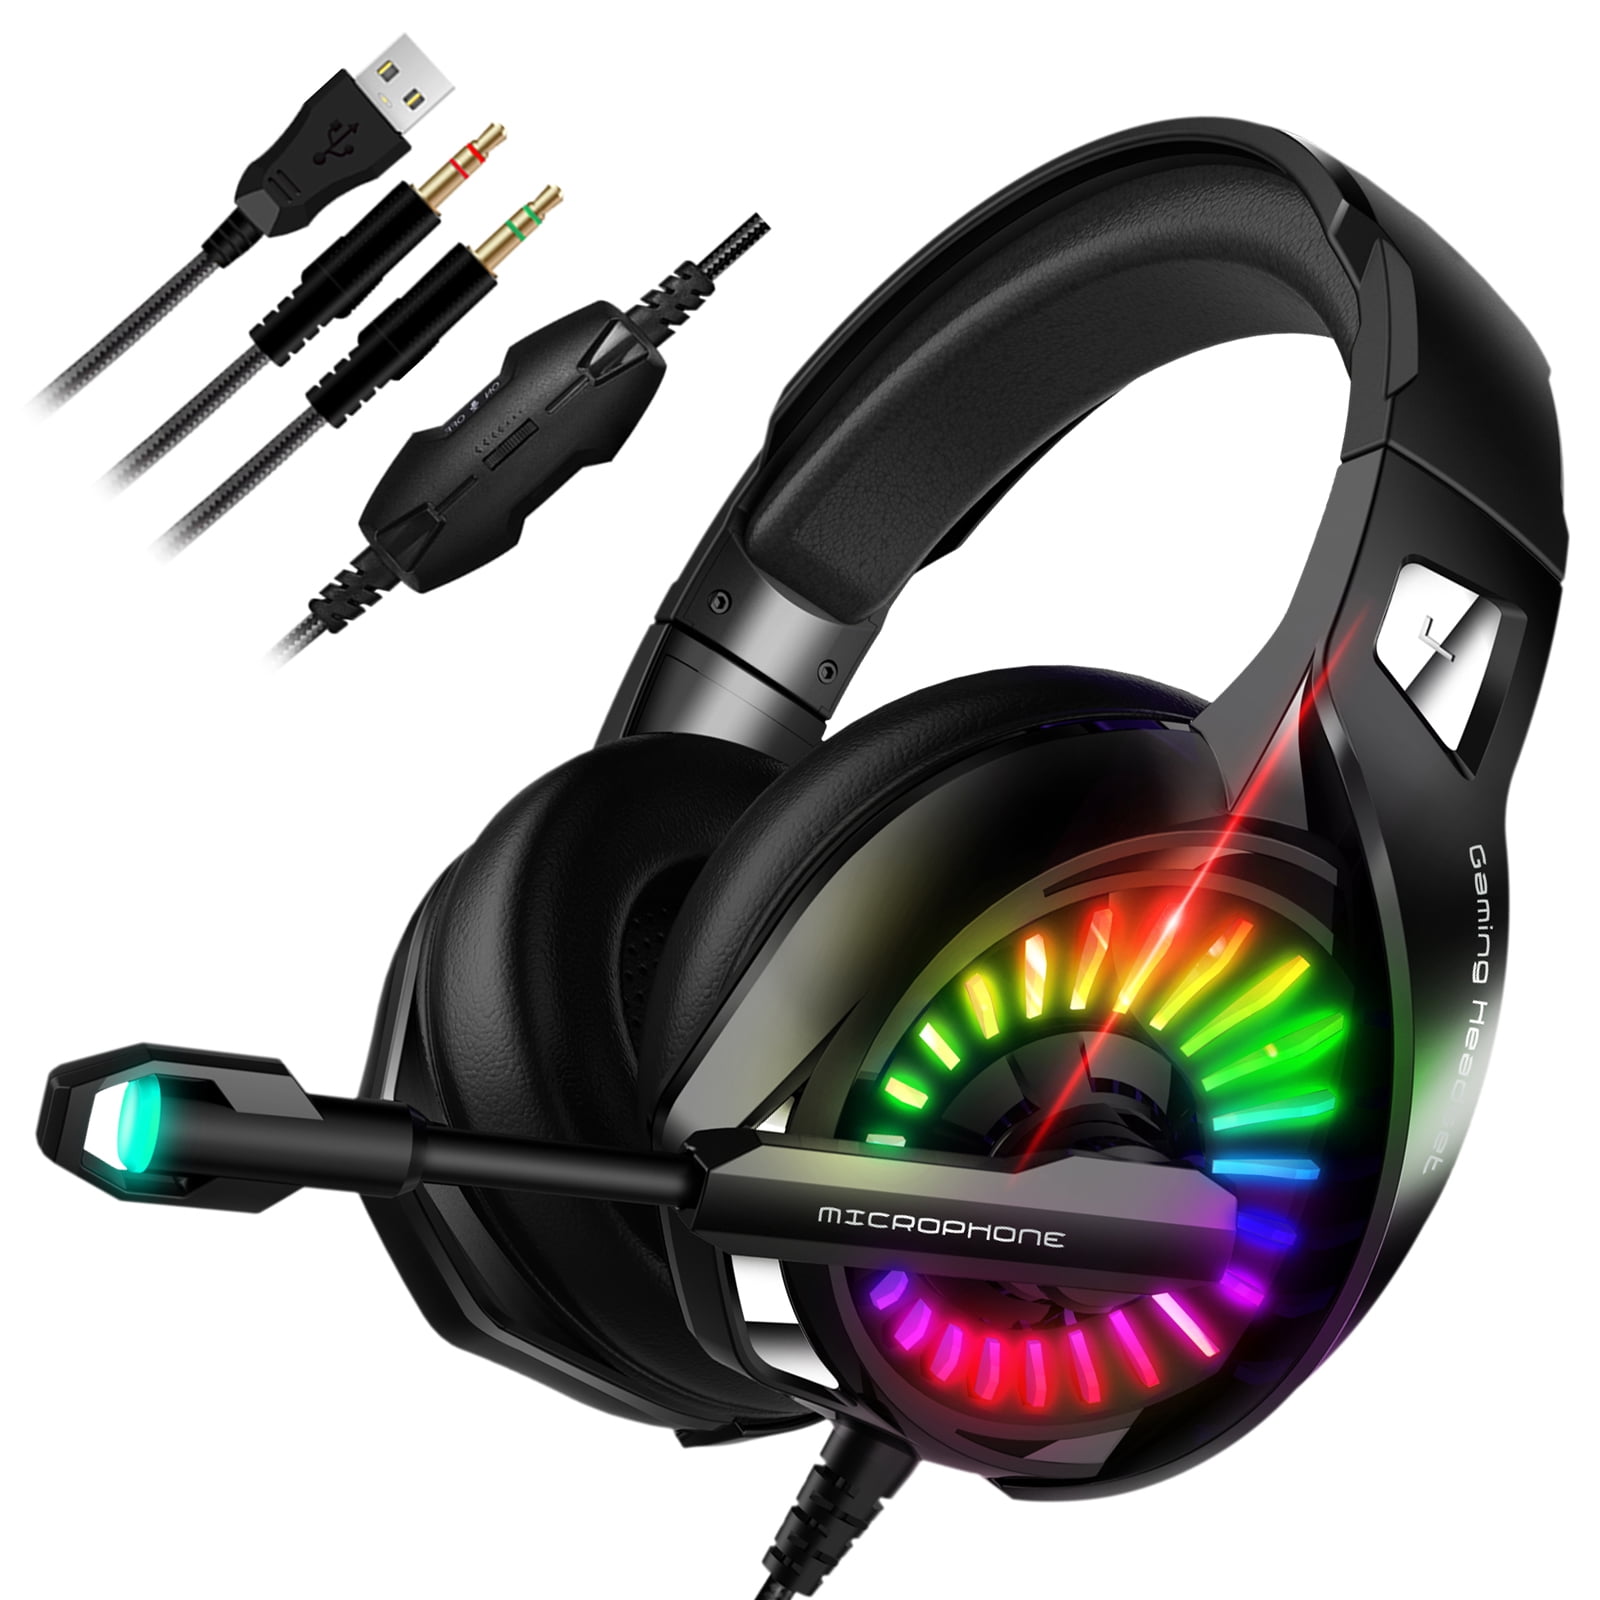 koel ring Inspecteren TSV Gaming Headset for PC, PS4, Xbox One - 7.1 Surround Sound Headphones  Over-Ear with Noise Canceling Microphone, RGB Backlit Lights, Memory  Earmuffs, 3.5mm Wired Headset for PC, Laptop, Mobile, Mac -